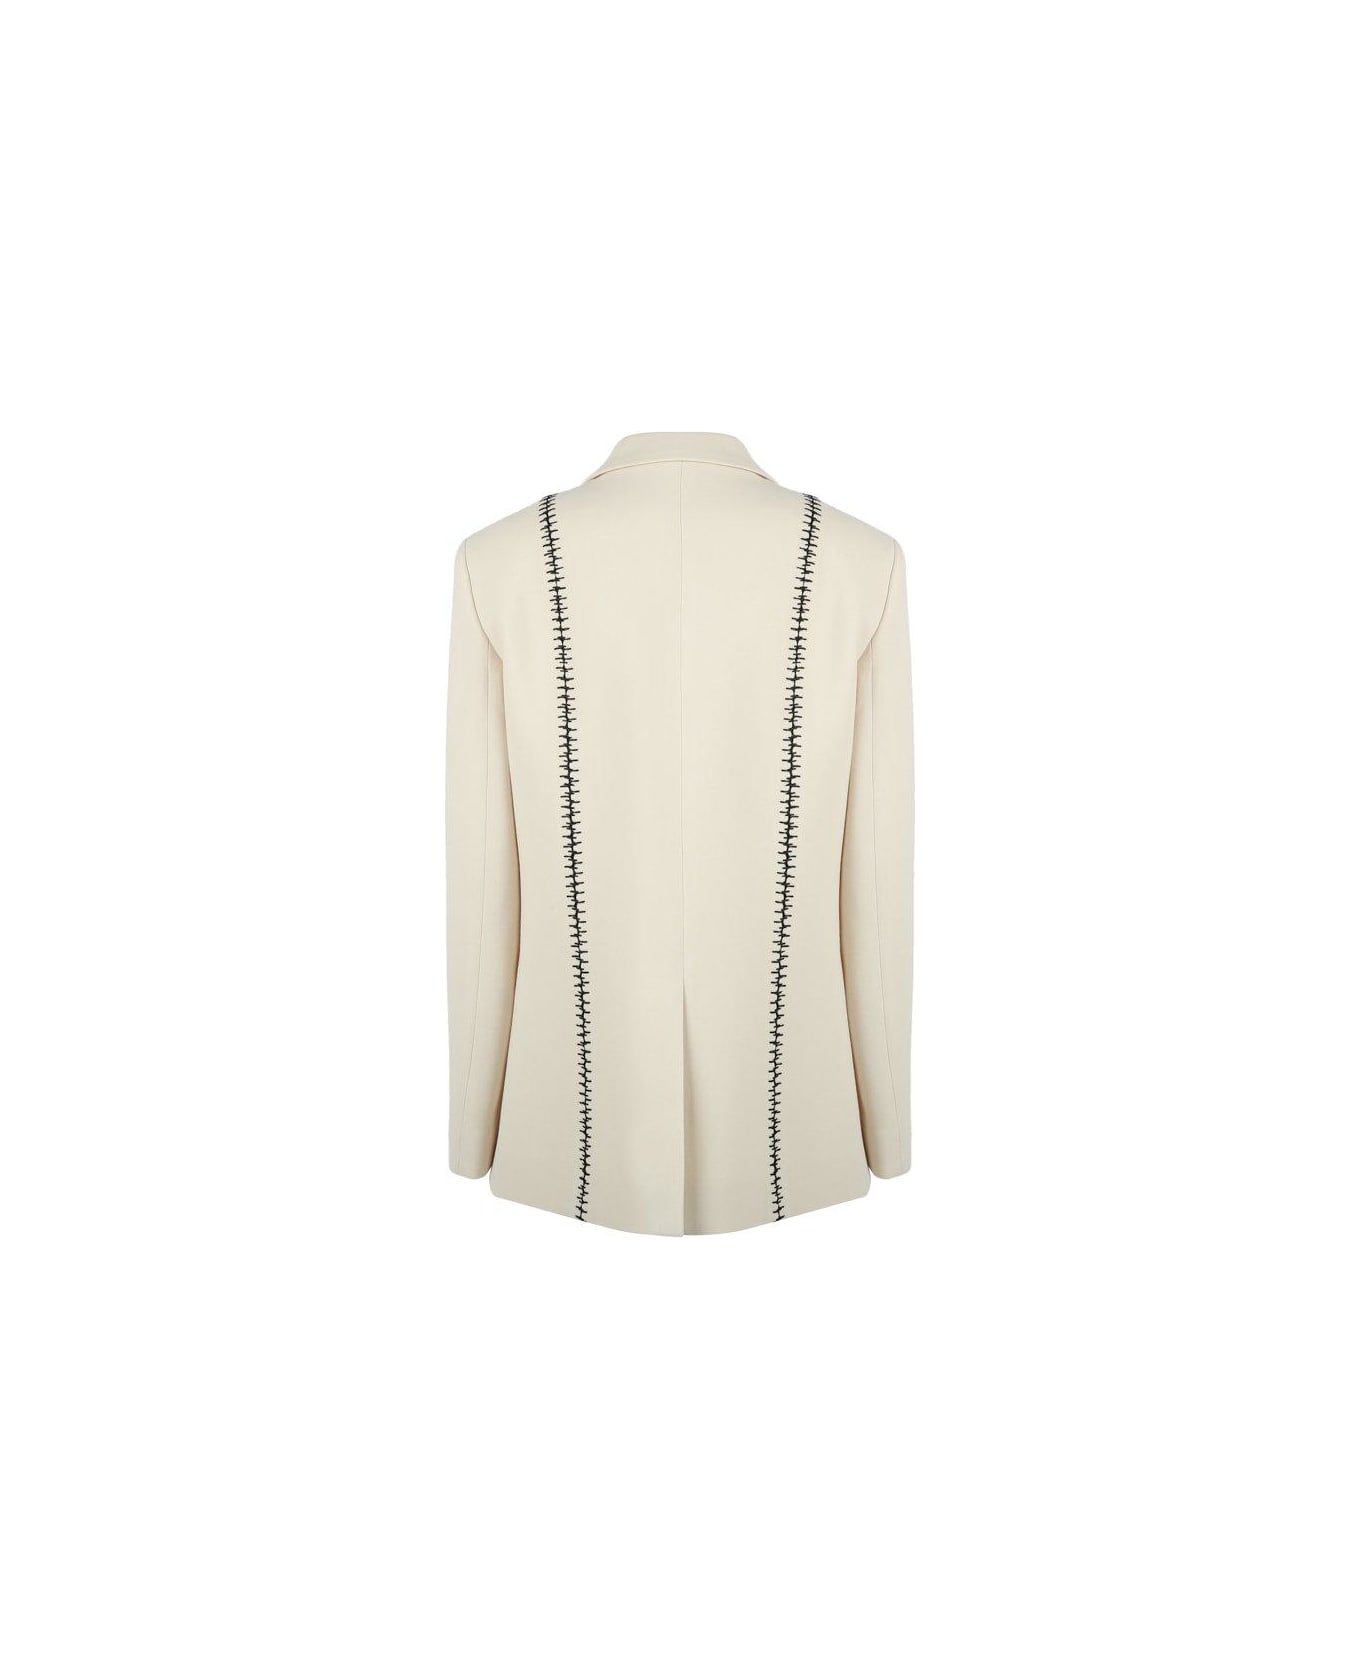 Chloé Embroidered Single-breasted Jacket - Seedpearl beige